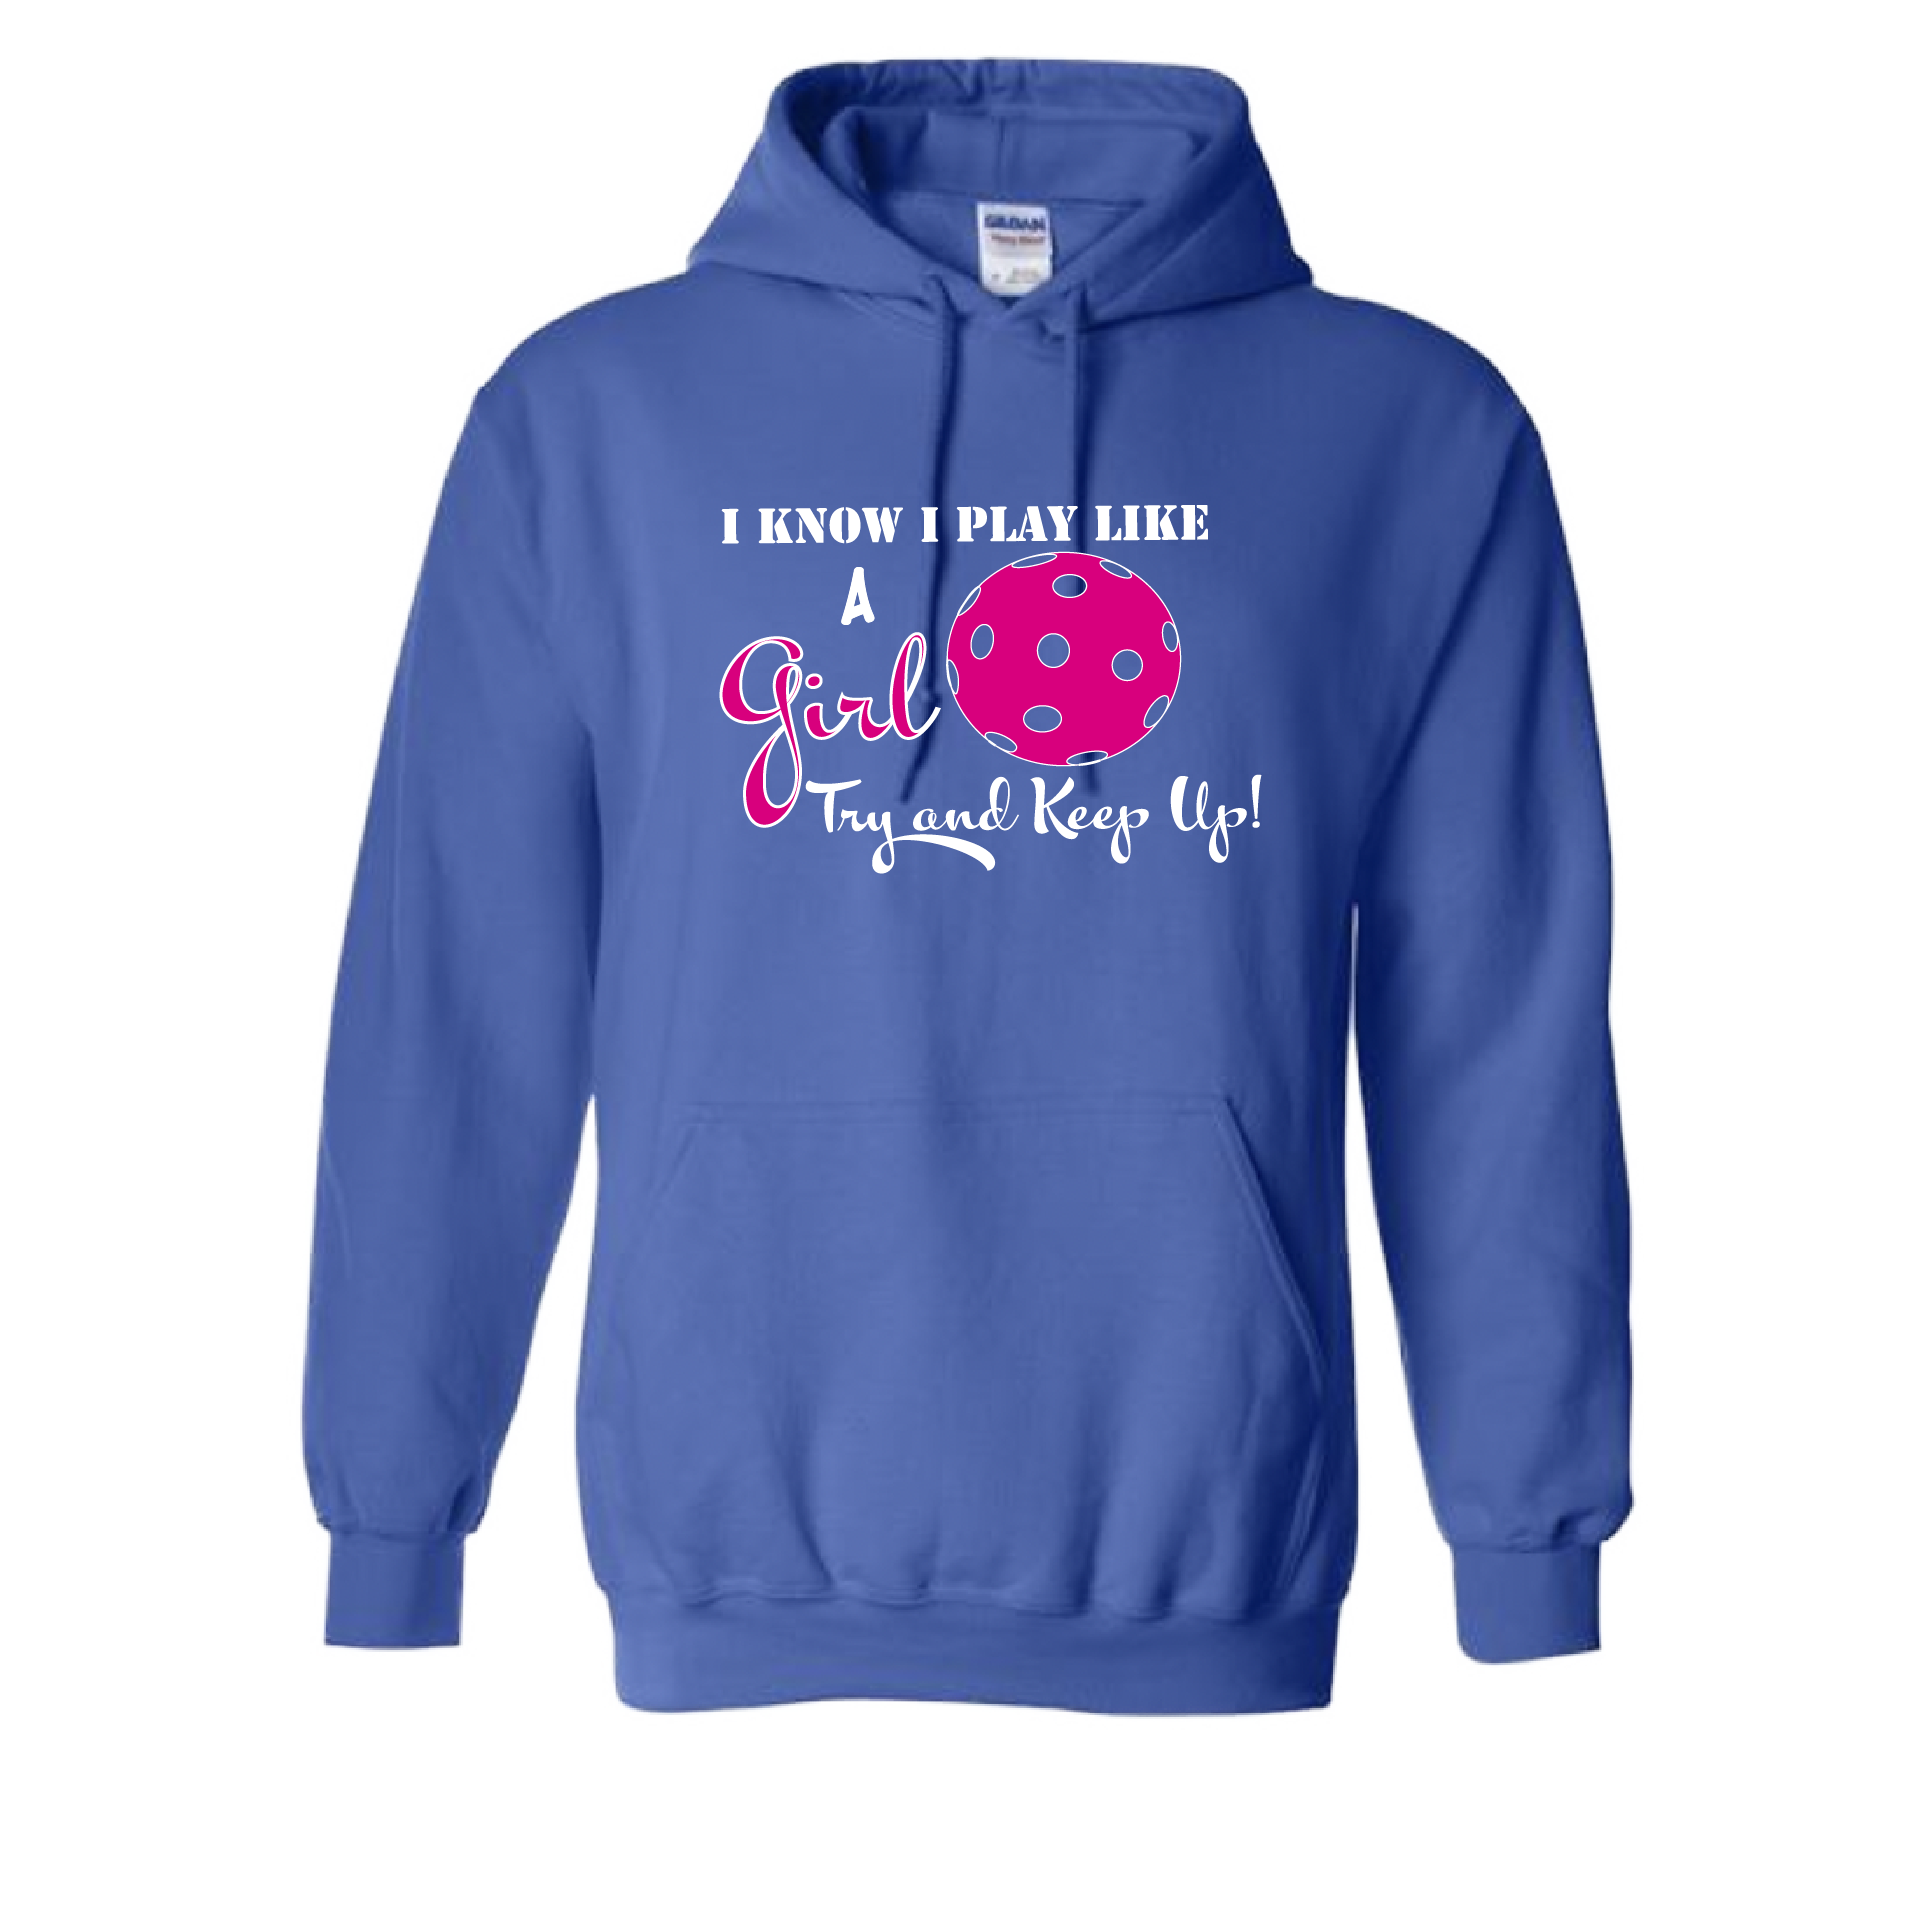 Pickleball Design: I know I Play Like a Girl, Try to Keep Upl  Unisex Hooded Sweatshirt:  Moisture-wicking, double-lined hood, front pouch pocket.  This unisex hooded sweatshirt is ultra comfortable and soft. Stay warm on the Pickleball courts while being that hit with this one of kind design.